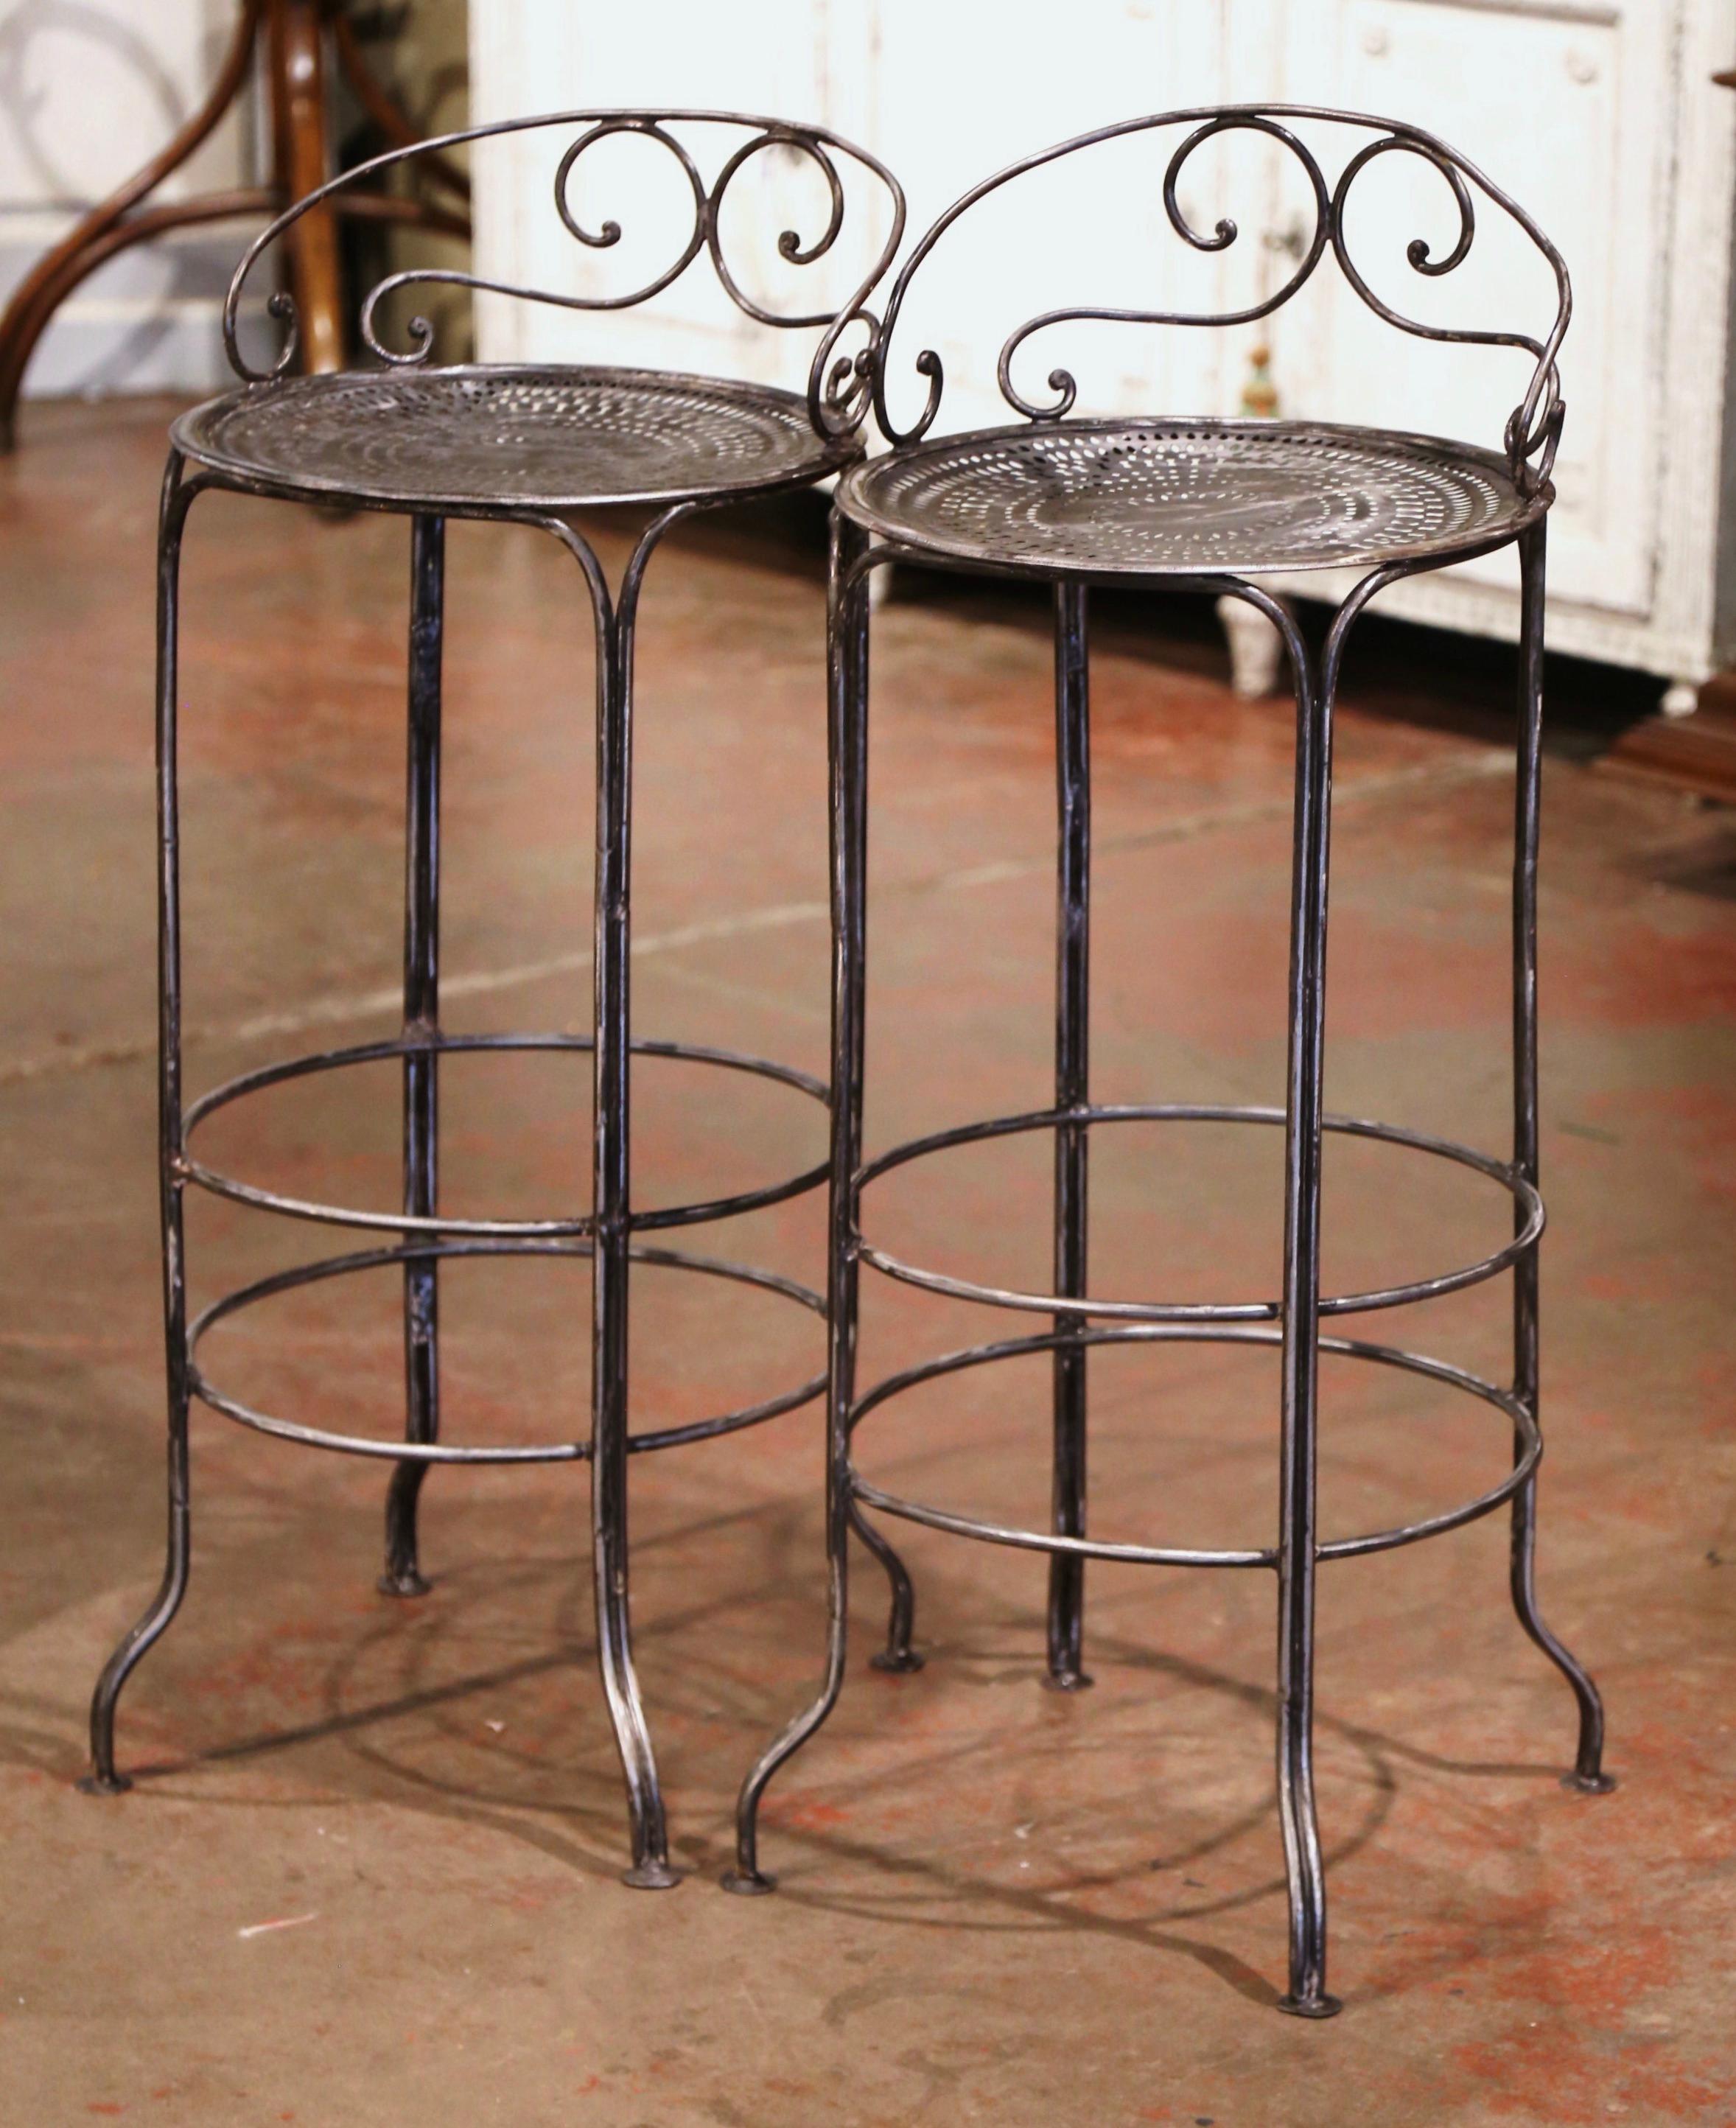 Pair of 19th Century French Polished Wrought Iron Outdoor Garden Bar Stools 1